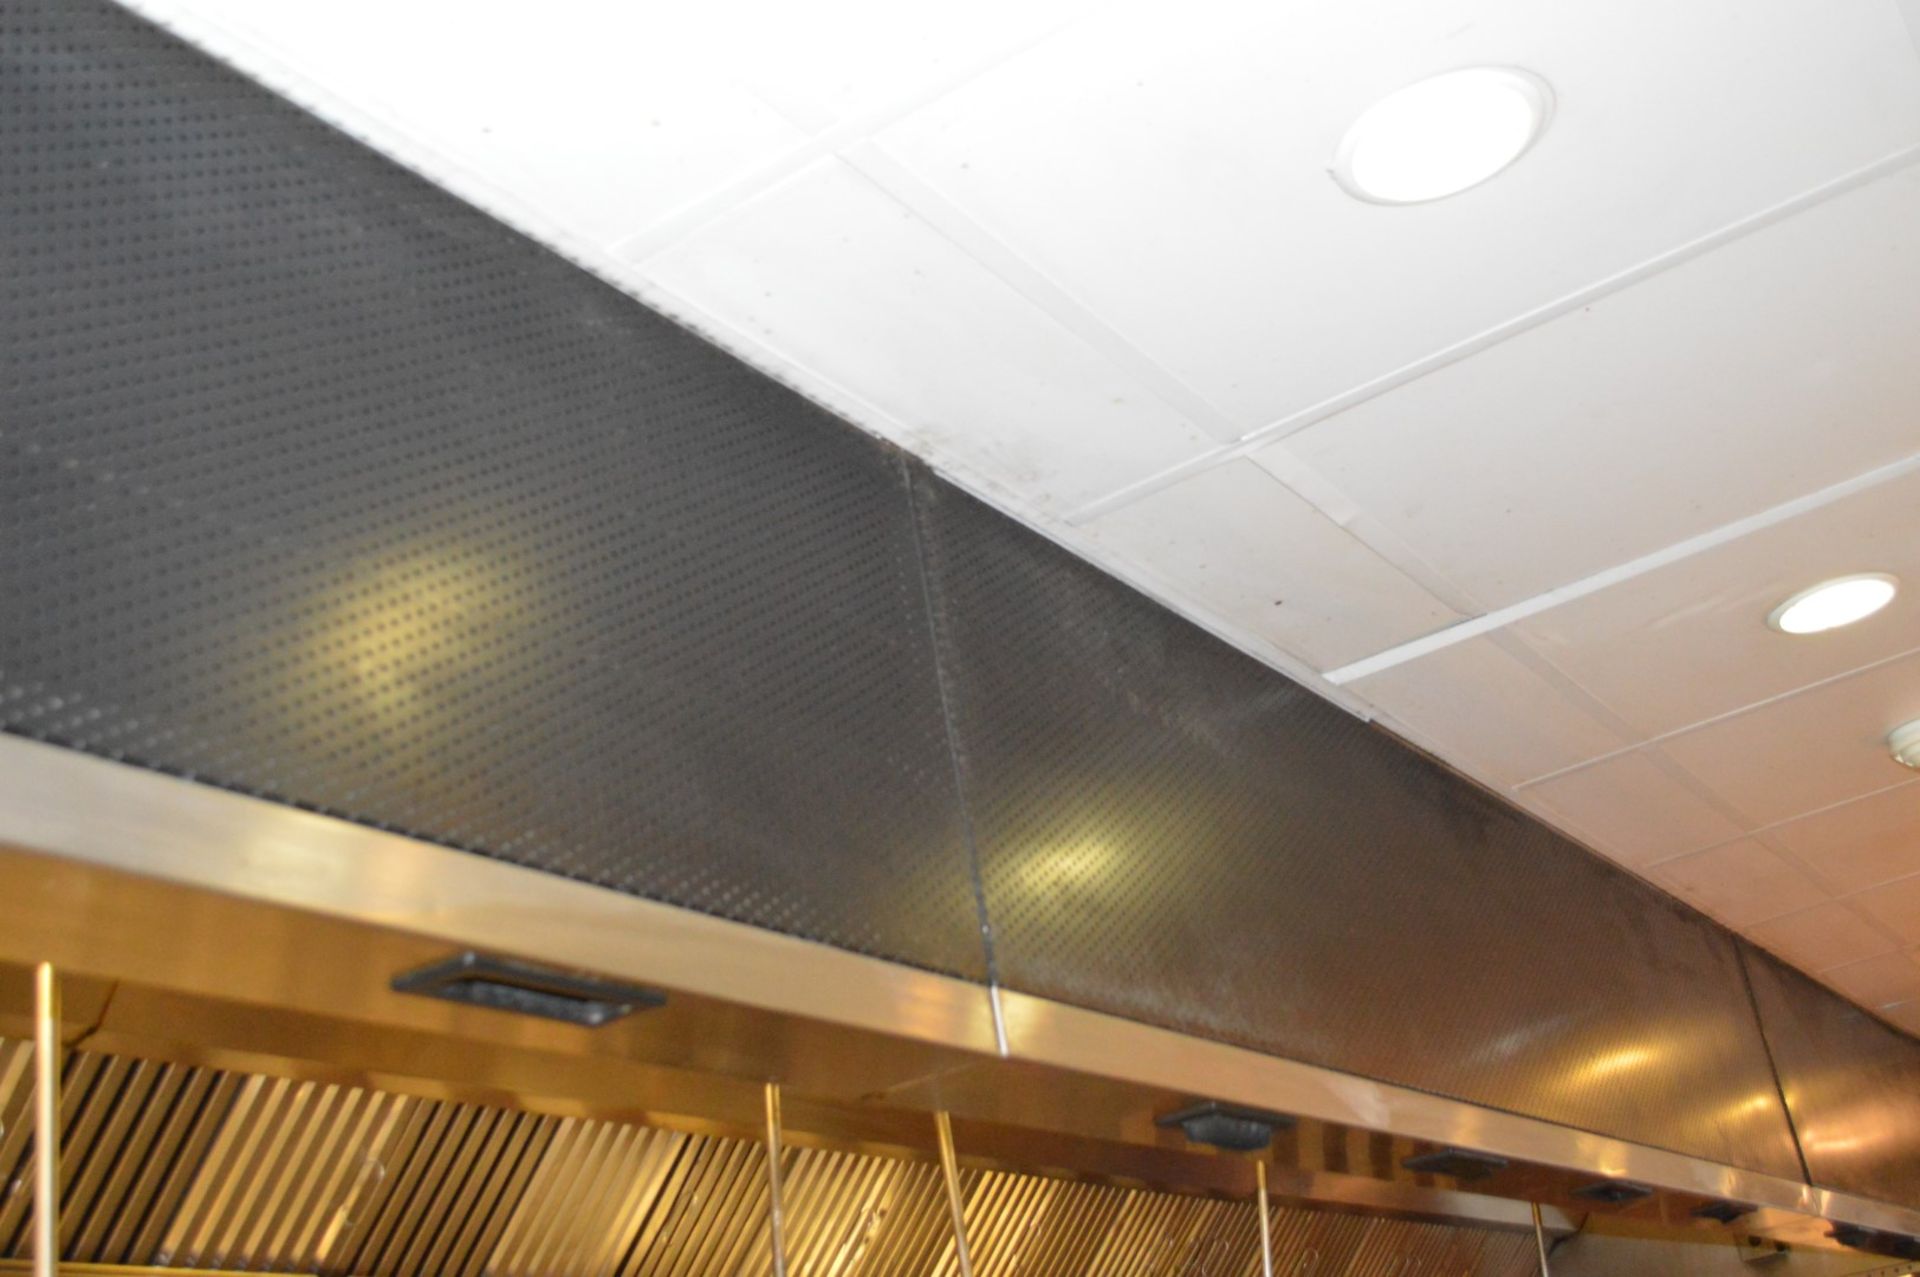 1 x Commercial Stainless Steel Kitchen Extractor Canopy With Ansul R-102 Fire Suppression System - - Image 12 of 13